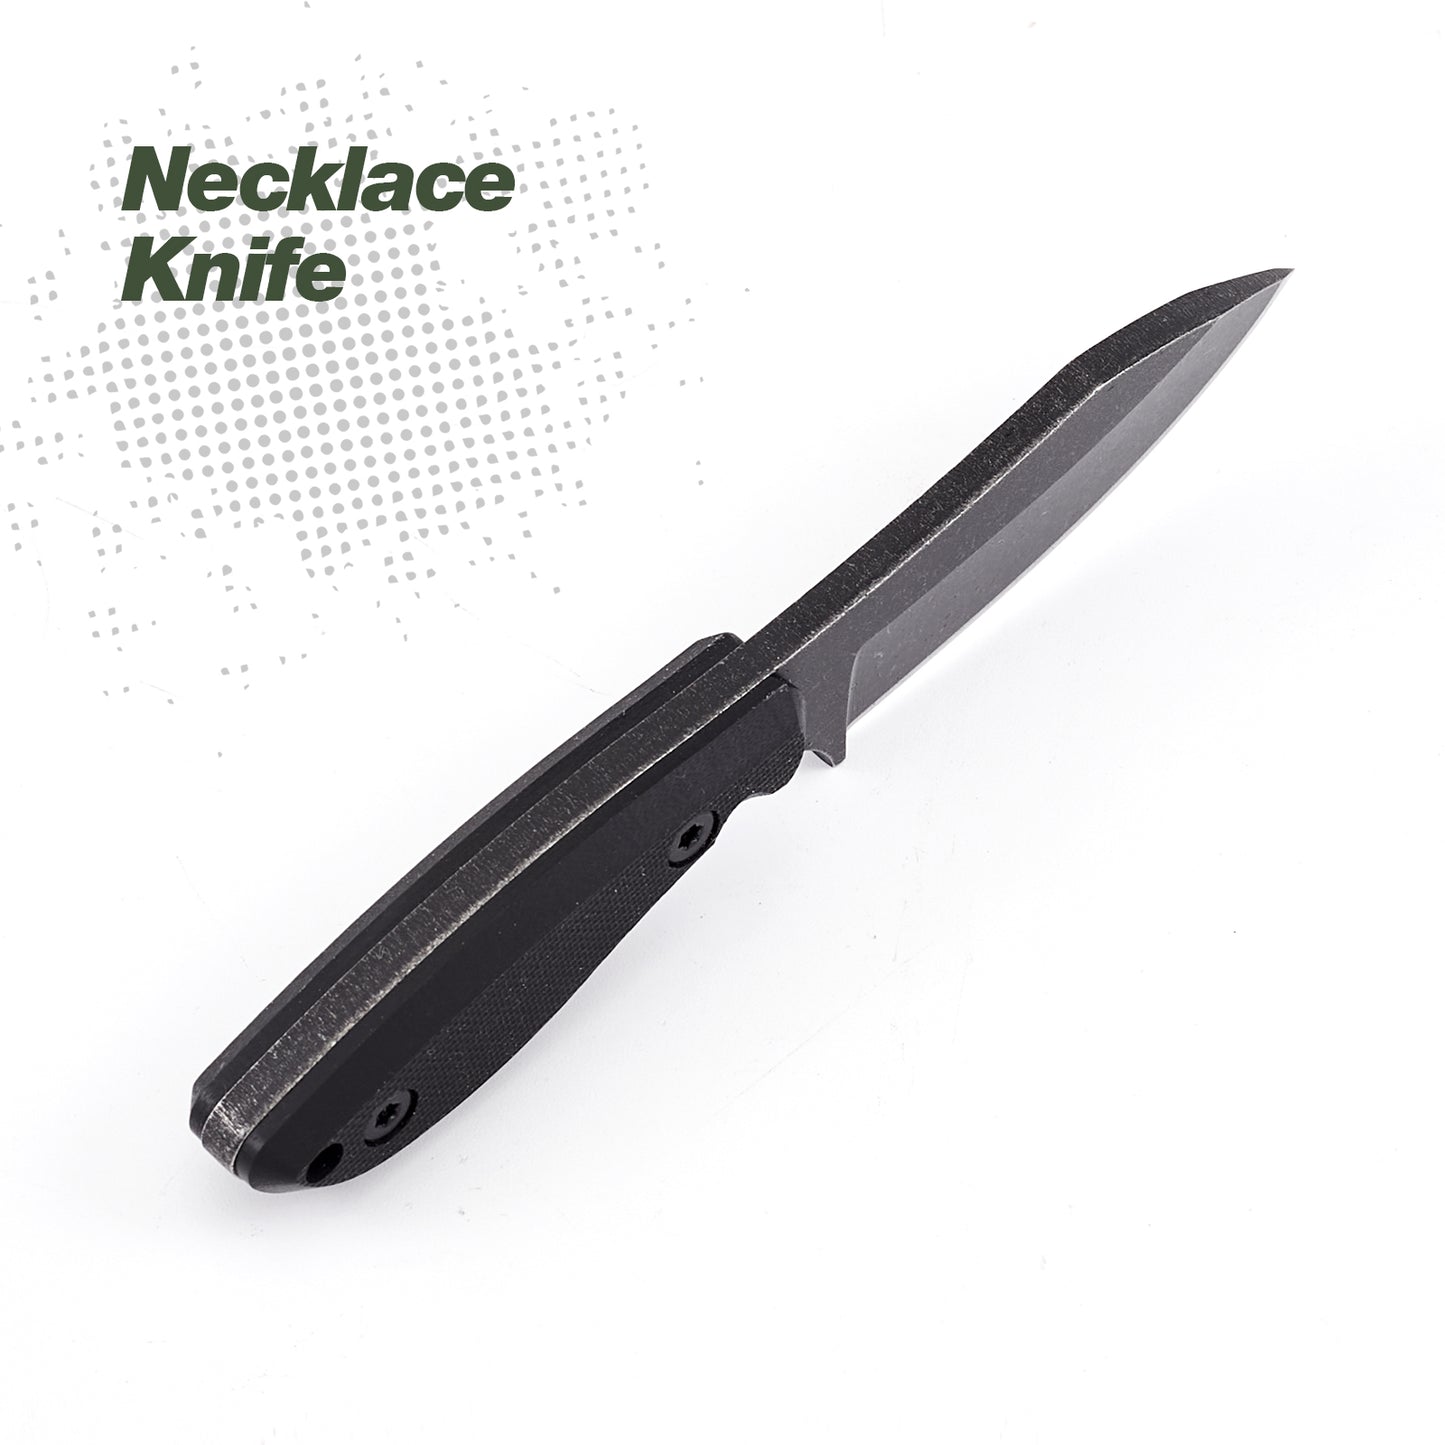 KHU Neck Knife Fixed Blade EDC Knife - Knife Necklace Mini Knife Survival Knife Neck Knives - D2 Steel G10 Handle - Outdoor Hunting Camping Gear with kydex Sheath - 09A